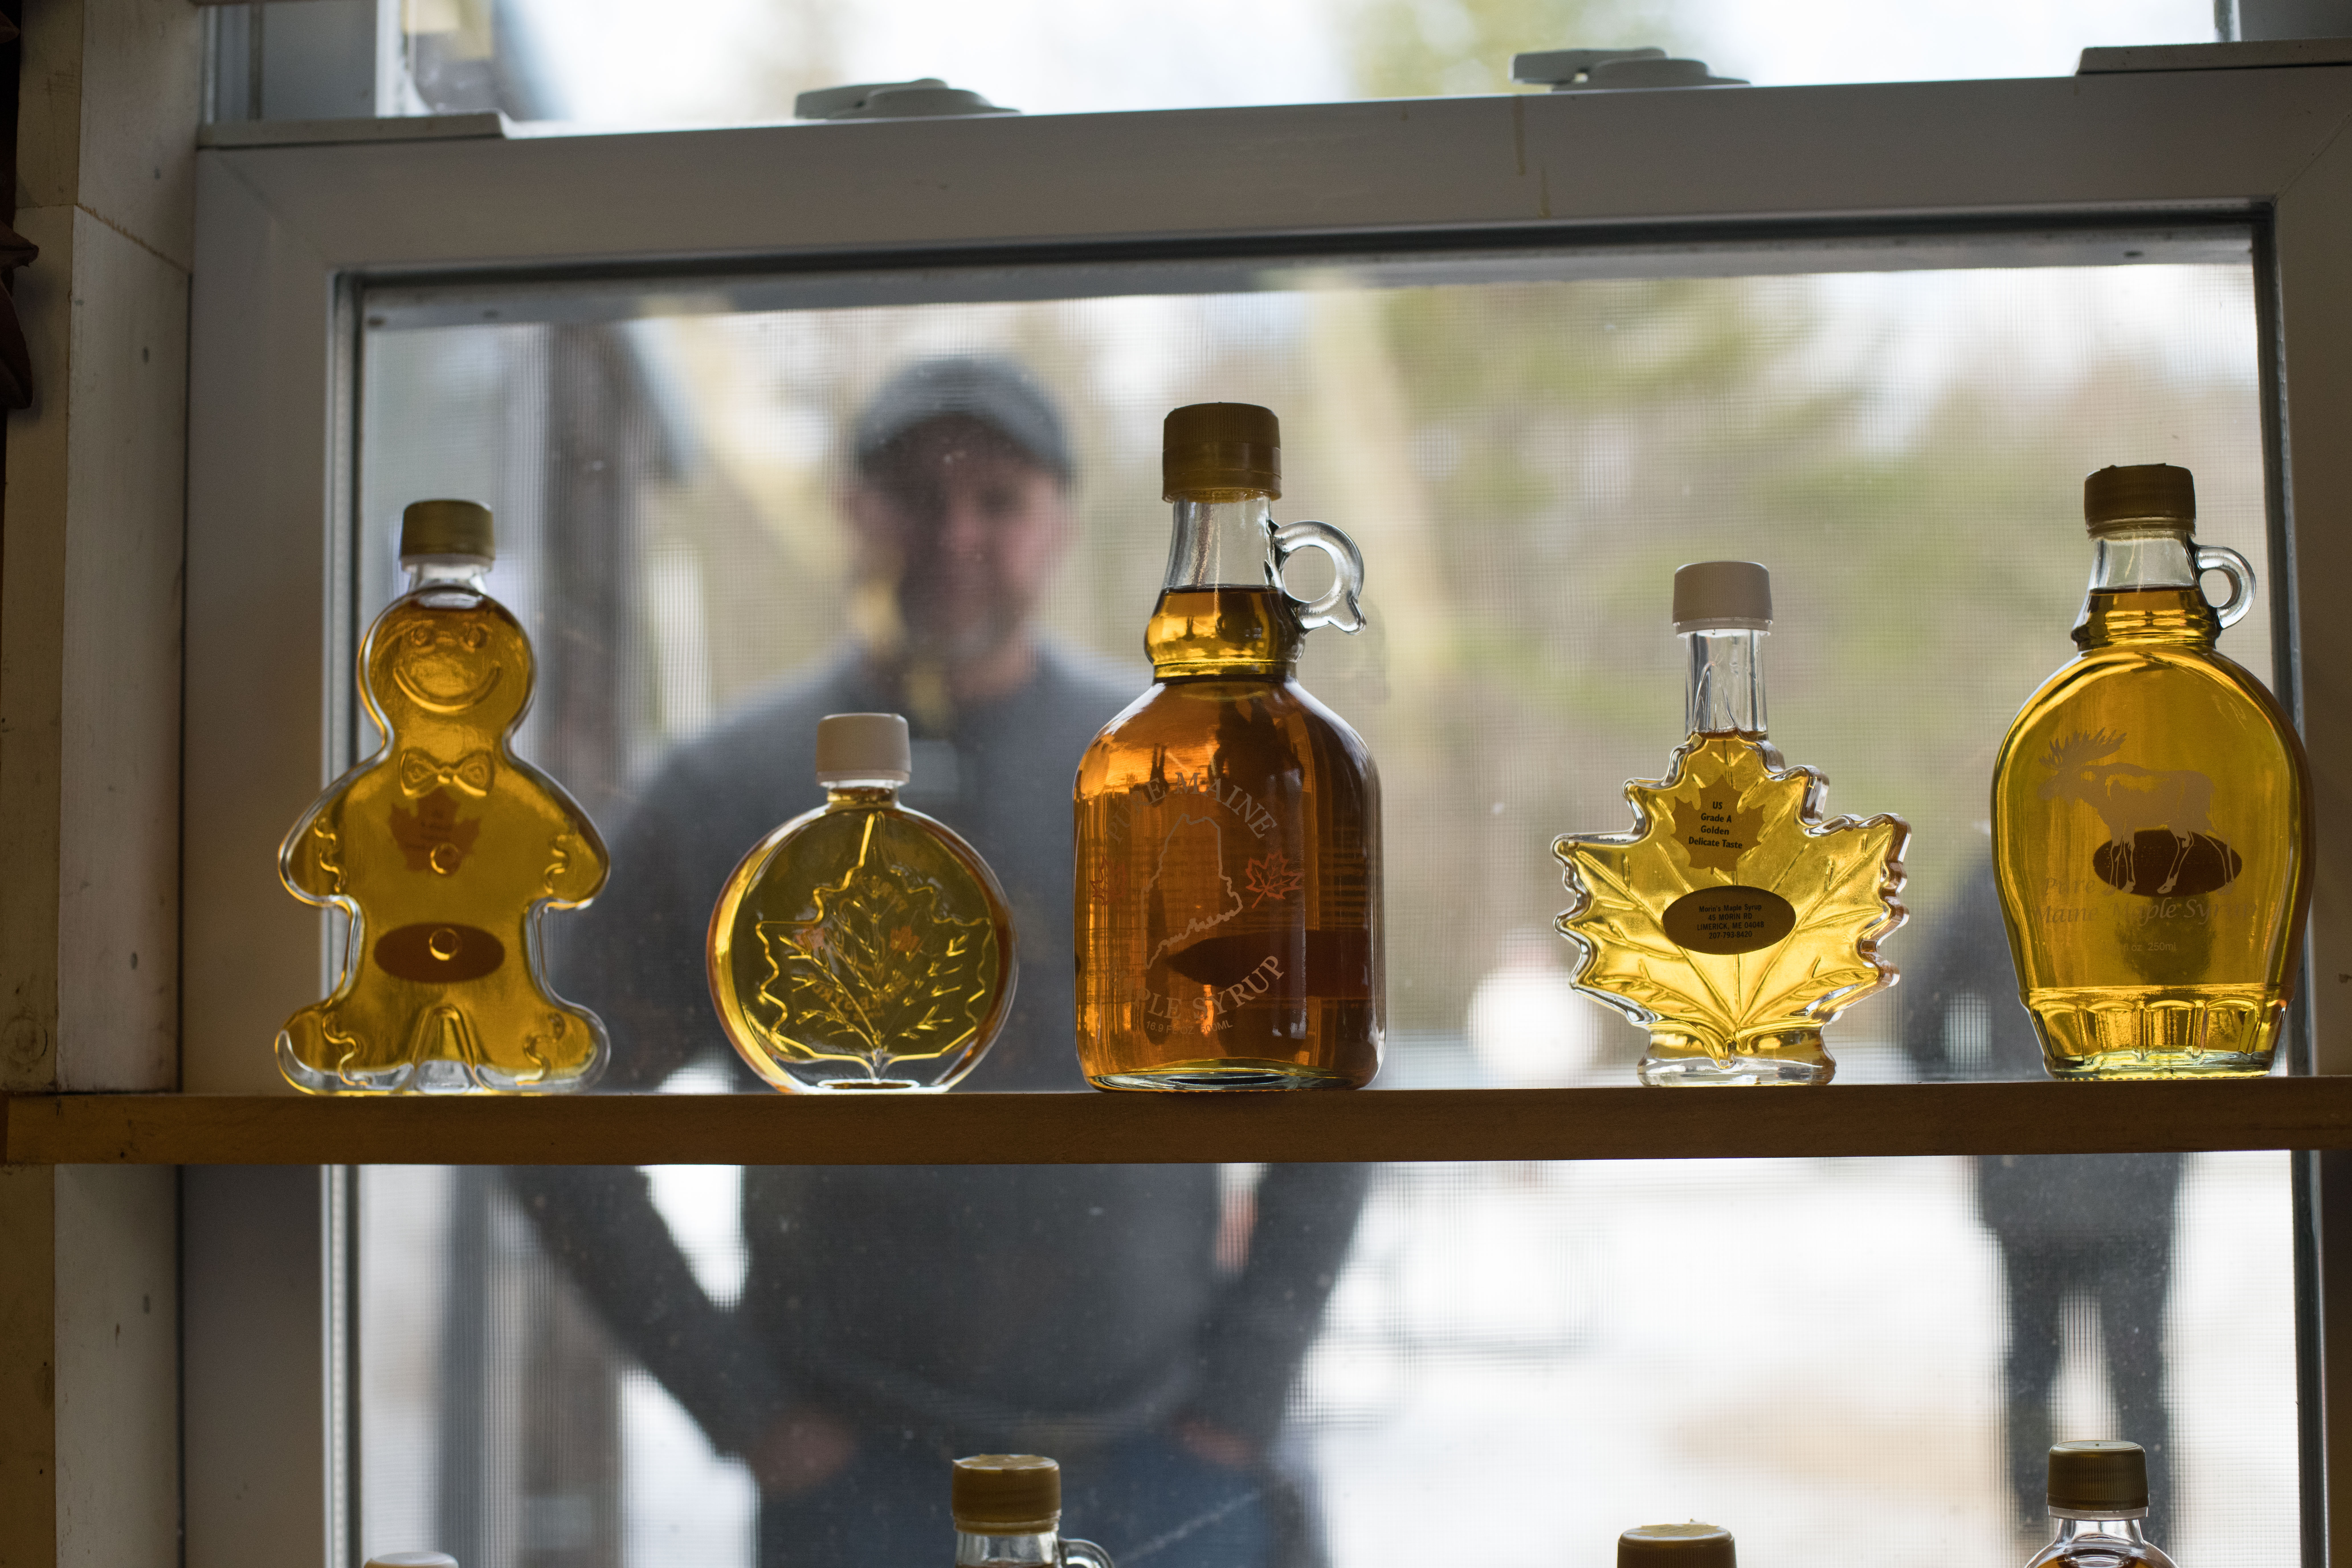 It's maple syrup time in Maine, and Gov. Mills officially kicks off the